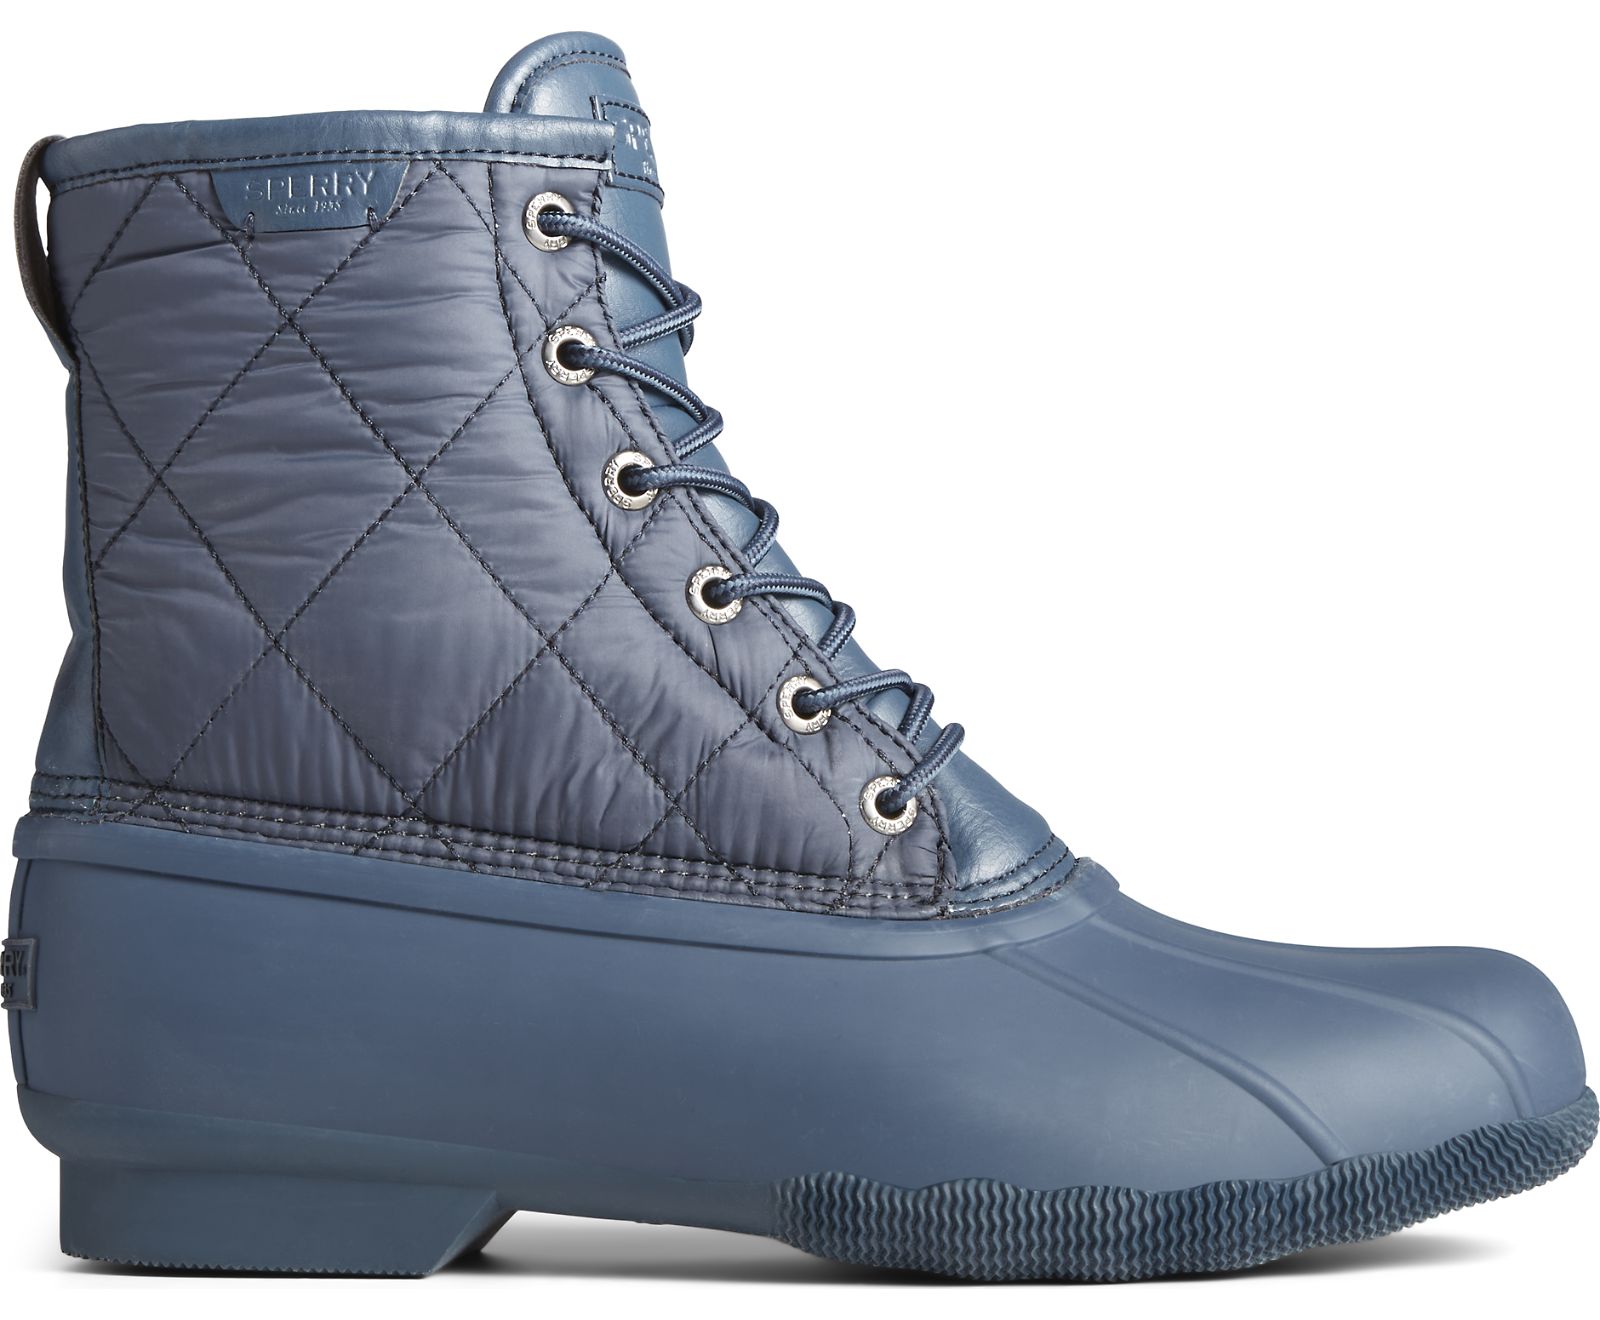 Men's Saltwater Nylon Duck Boot - Navy - Click Image to Close